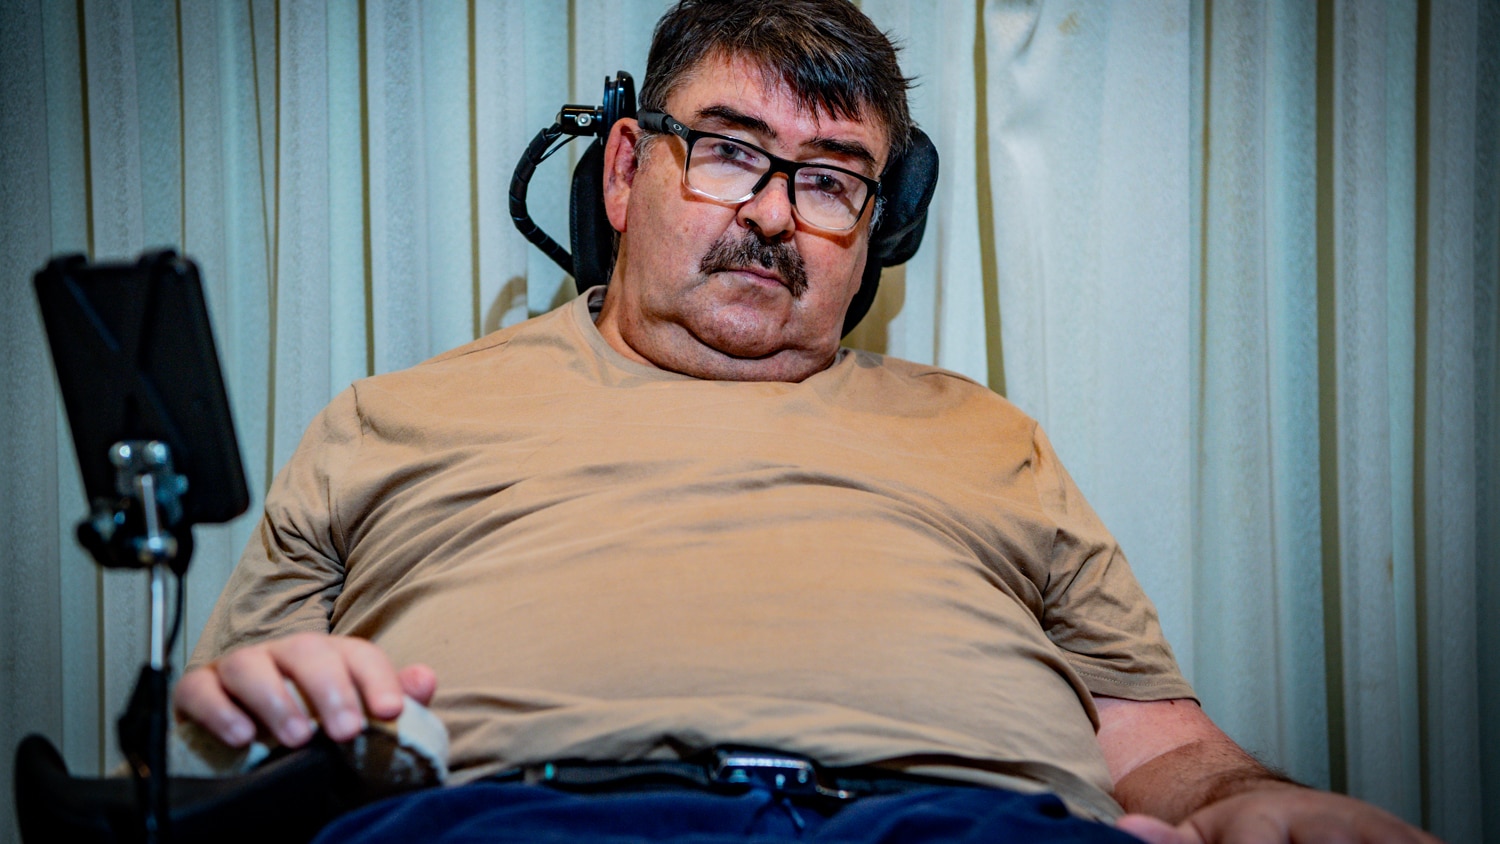 voluntary assisted dying will be legal in nsw from today. mark wants the choice to end his life